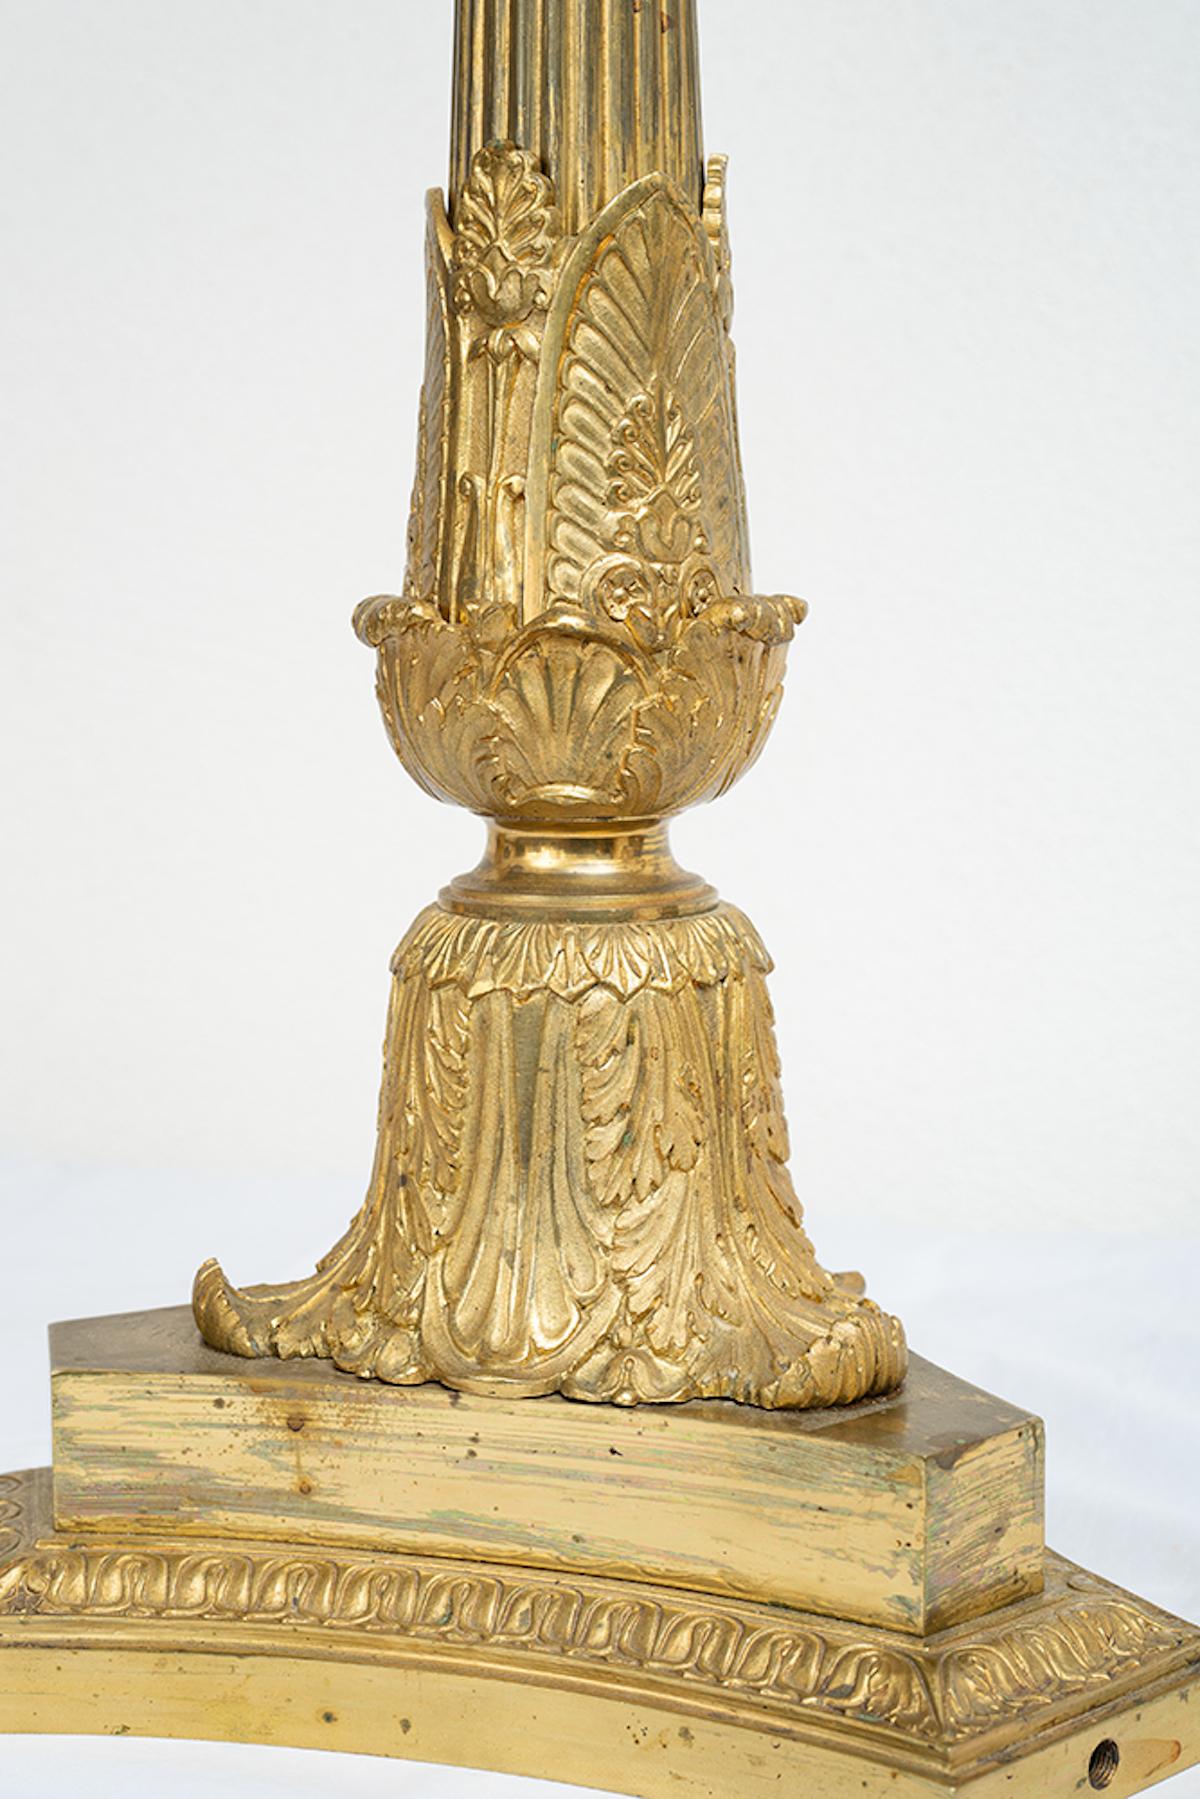 Pair of candelabra/Flambeaux 20sec - Gold Figurative Sculpture by Unknown